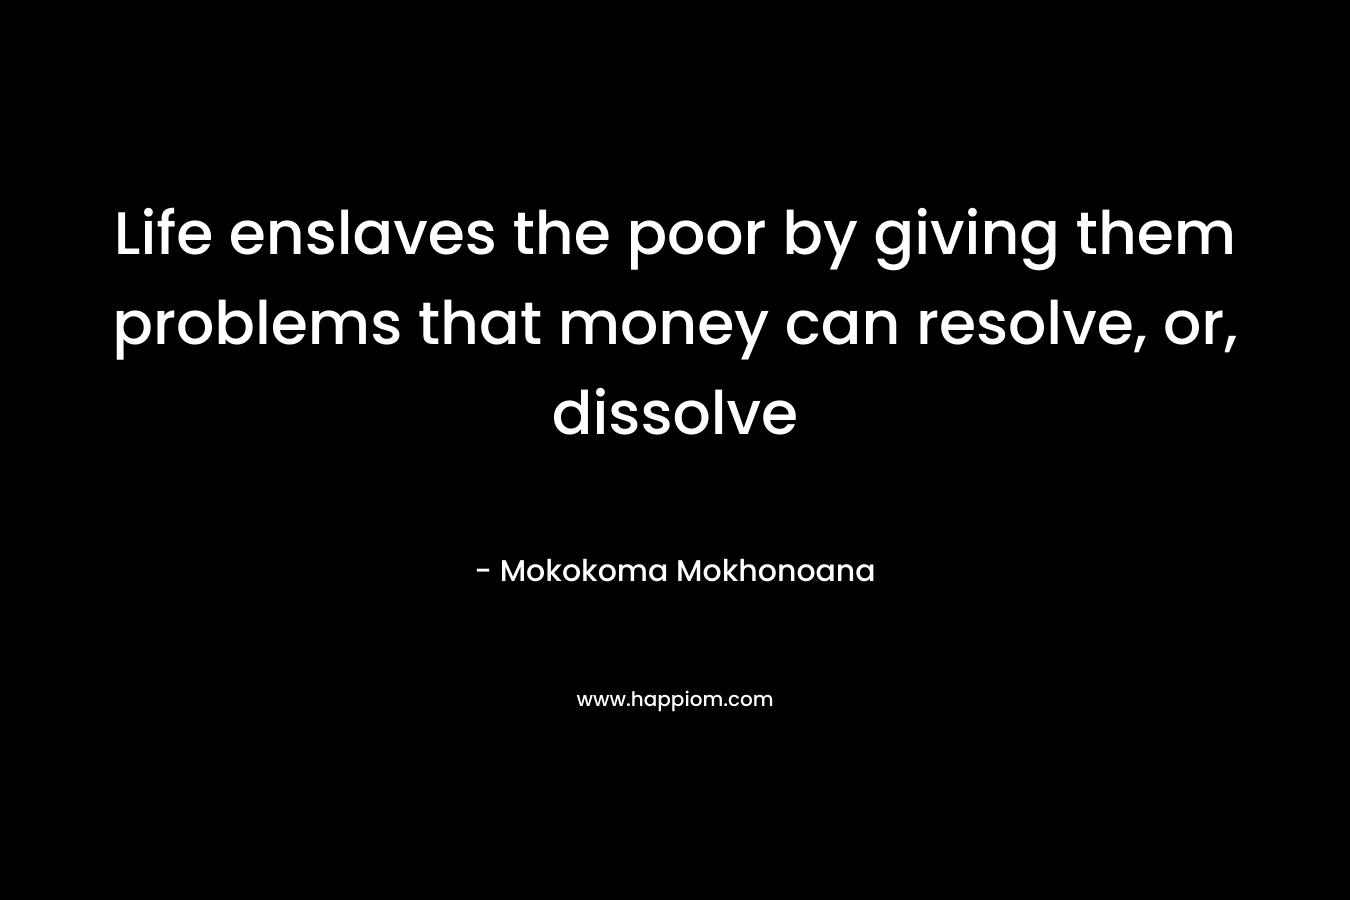 Life enslaves the poor by giving them problems that money can resolve, or, dissolve – Mokokoma Mokhonoana